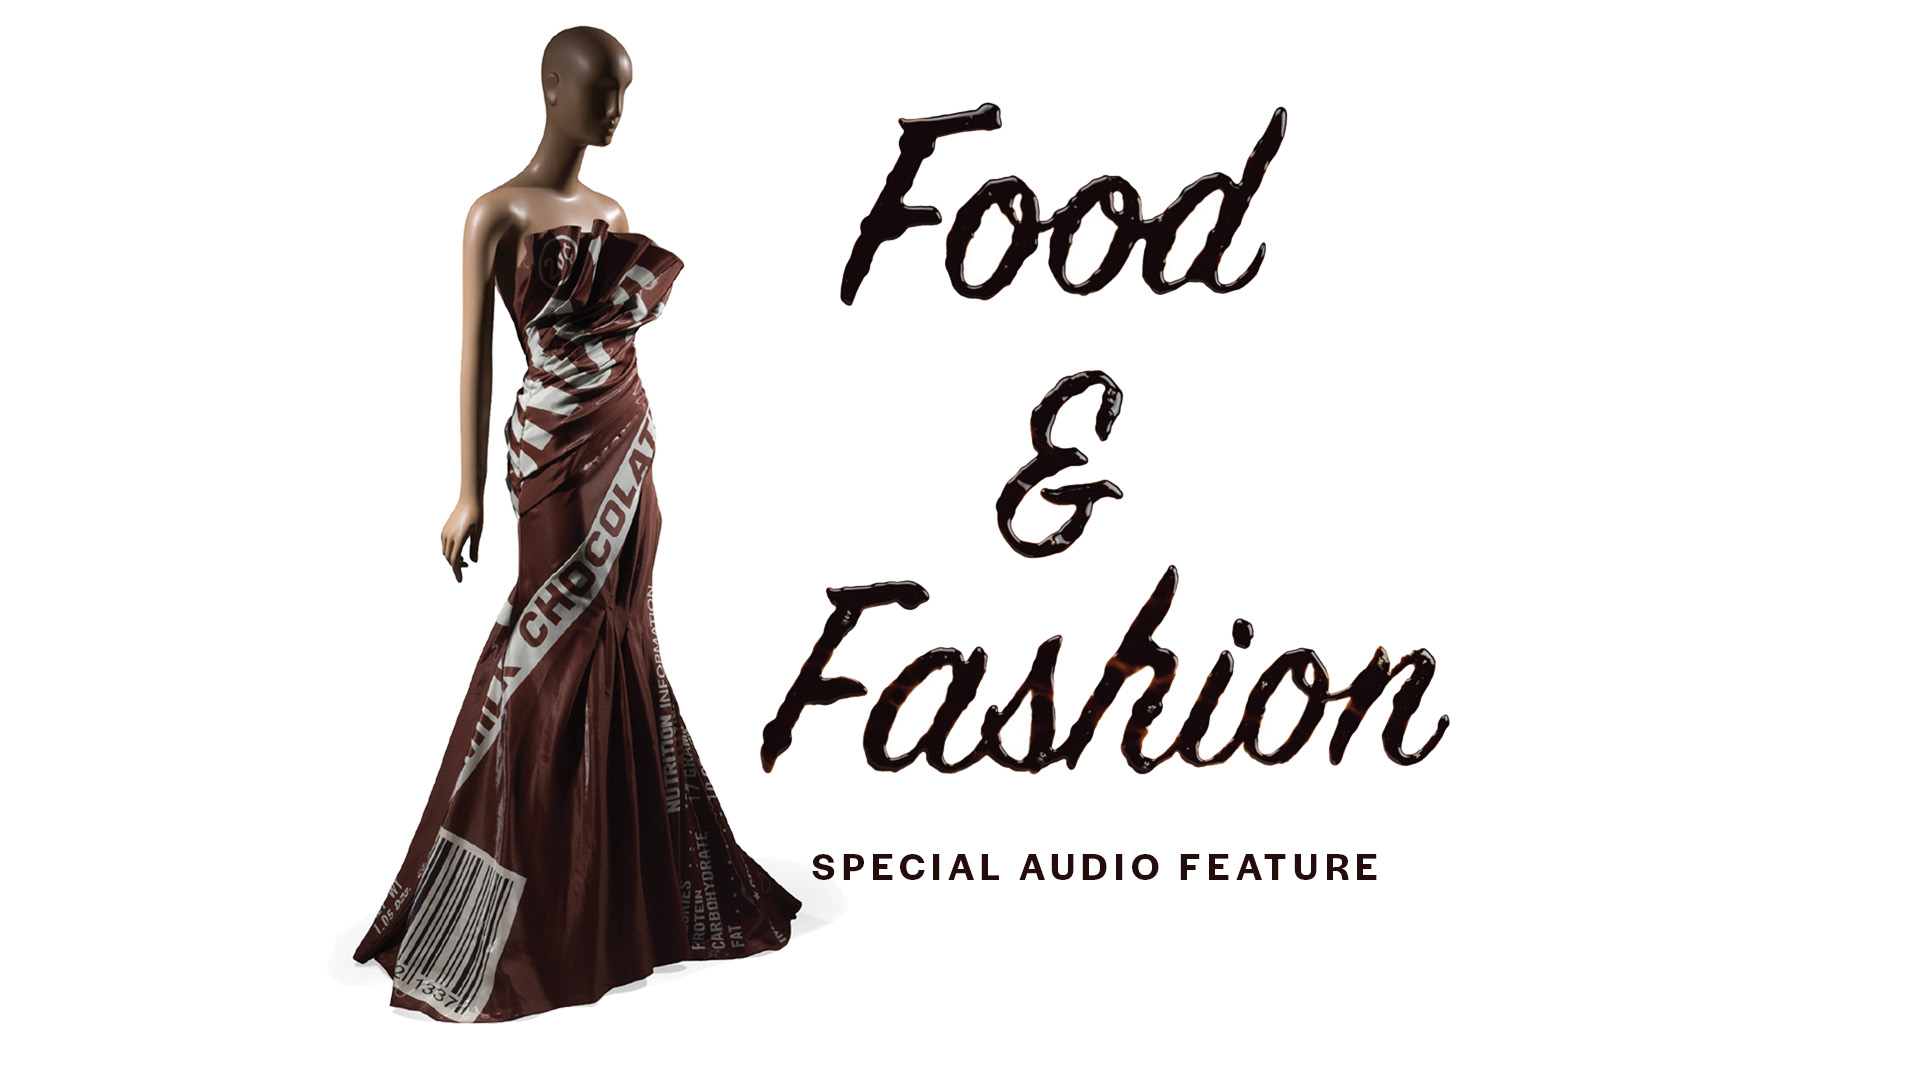 moschino chocolate bar gown dress with food & fashion in a choclate font